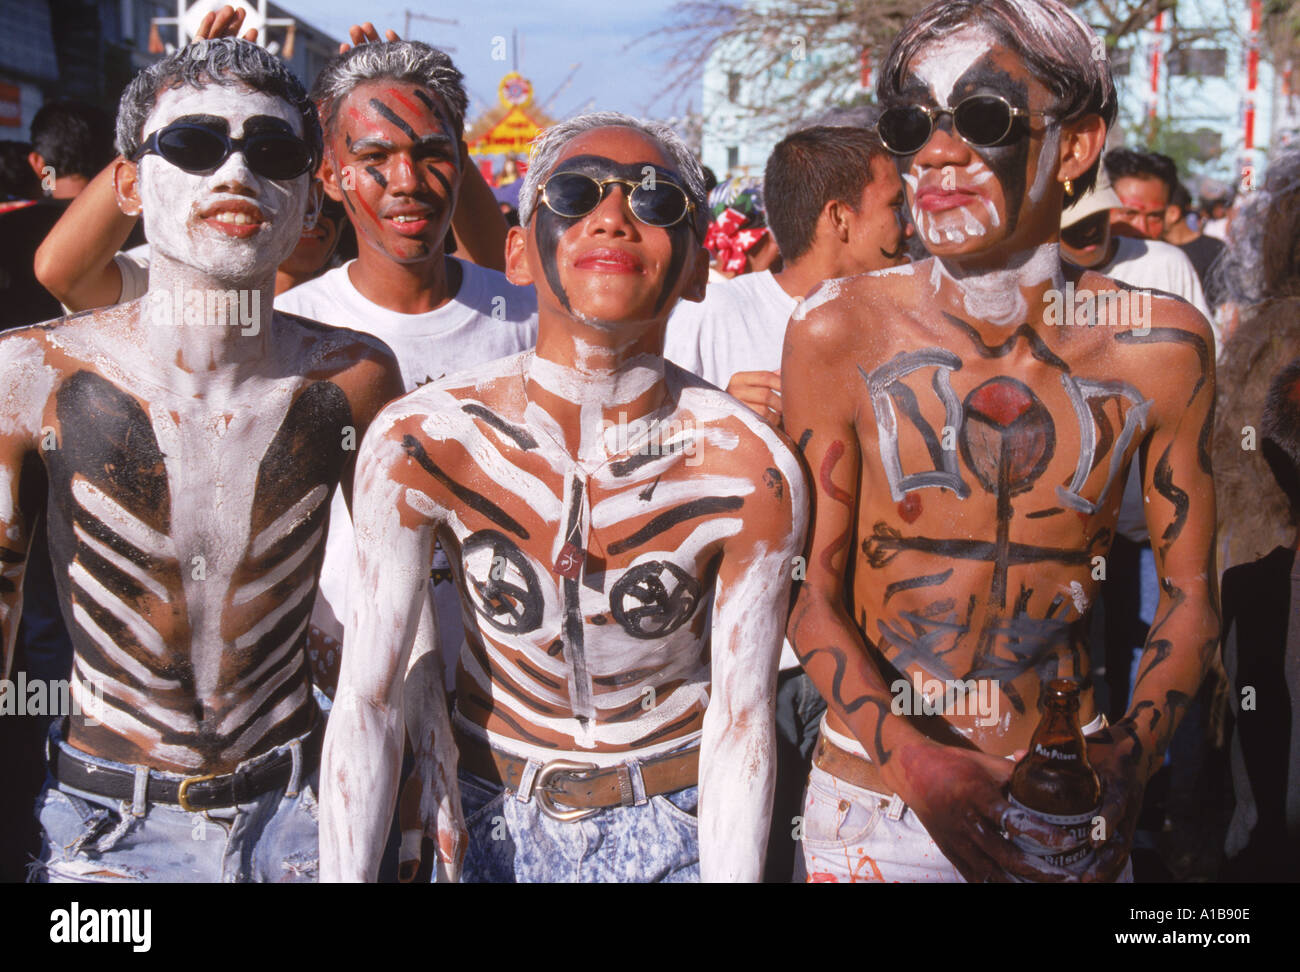 A group of men with body decoration and sunglasses during the Mardi Gras Ati Atihan at Kalico on Panay Island Philippines Asia Stock Photo